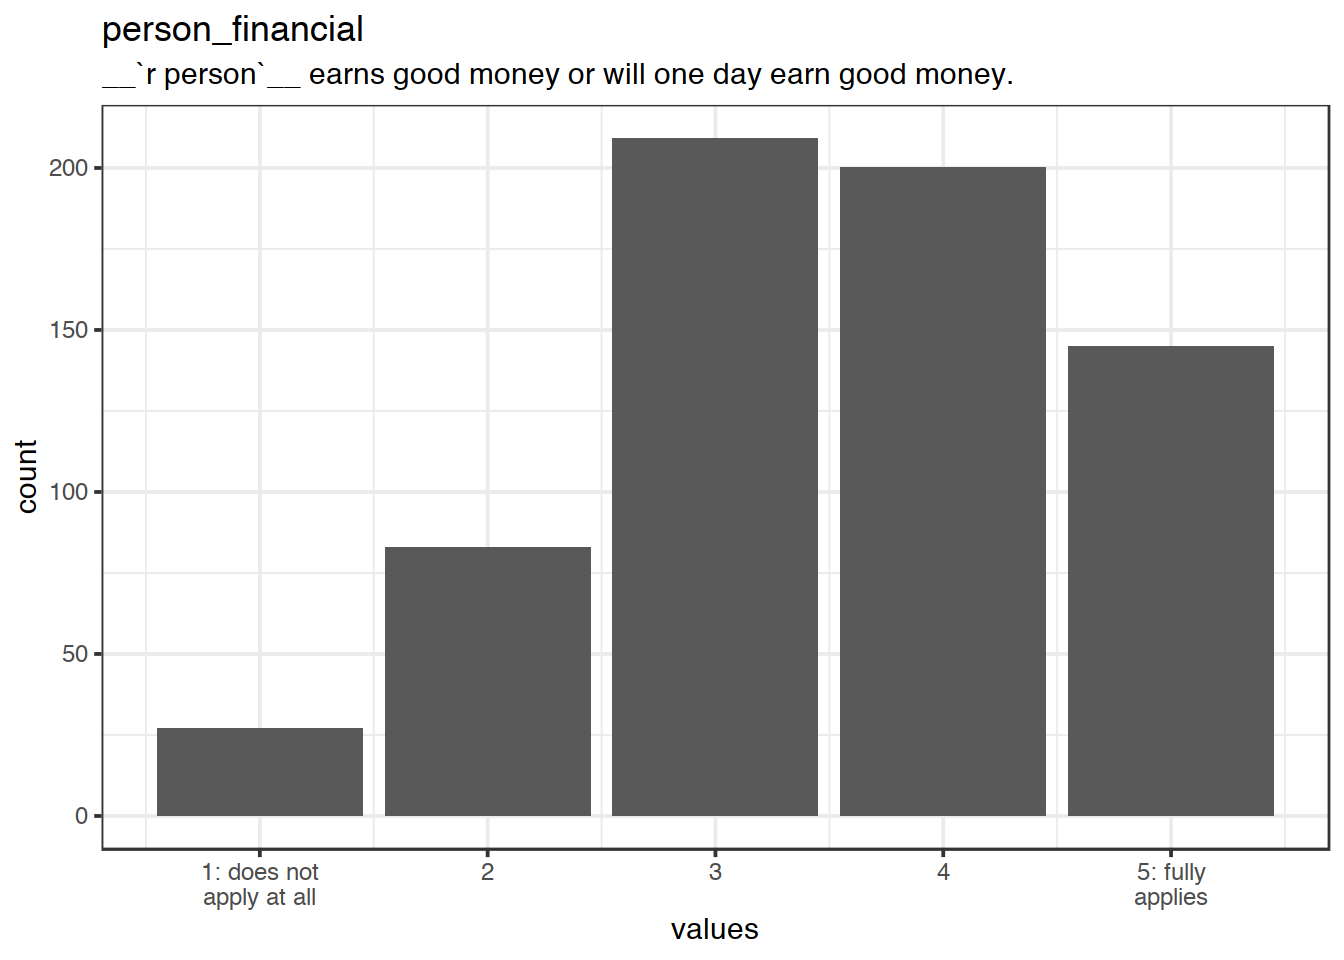 Distribution of values for person_financial